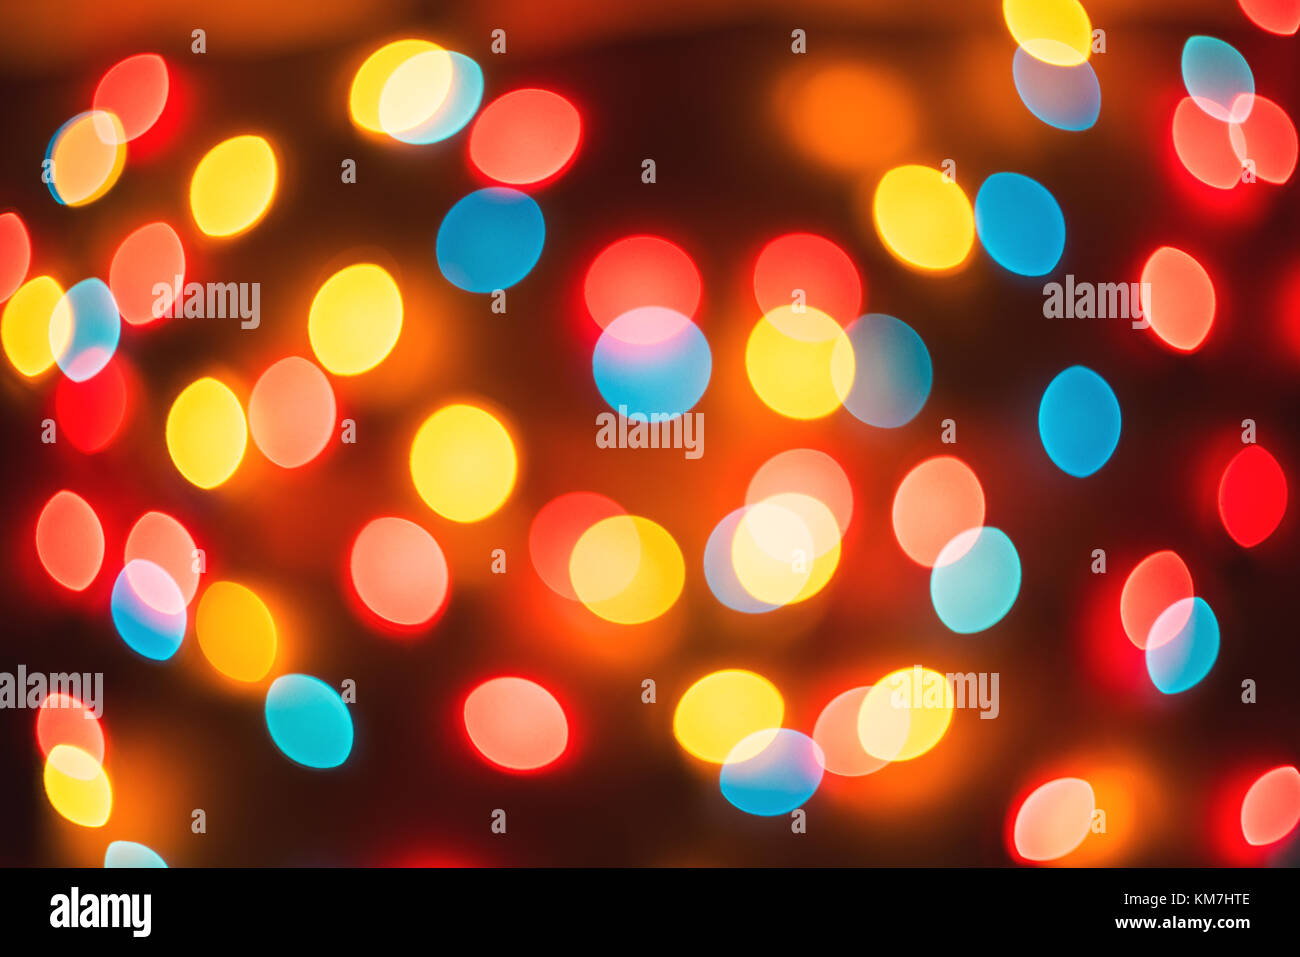 Bokeh. New Year bokeh background. Christmas abstract background with colorful bokeh defocused lights for holiday design. Concept. Blurred garland Stock Photo